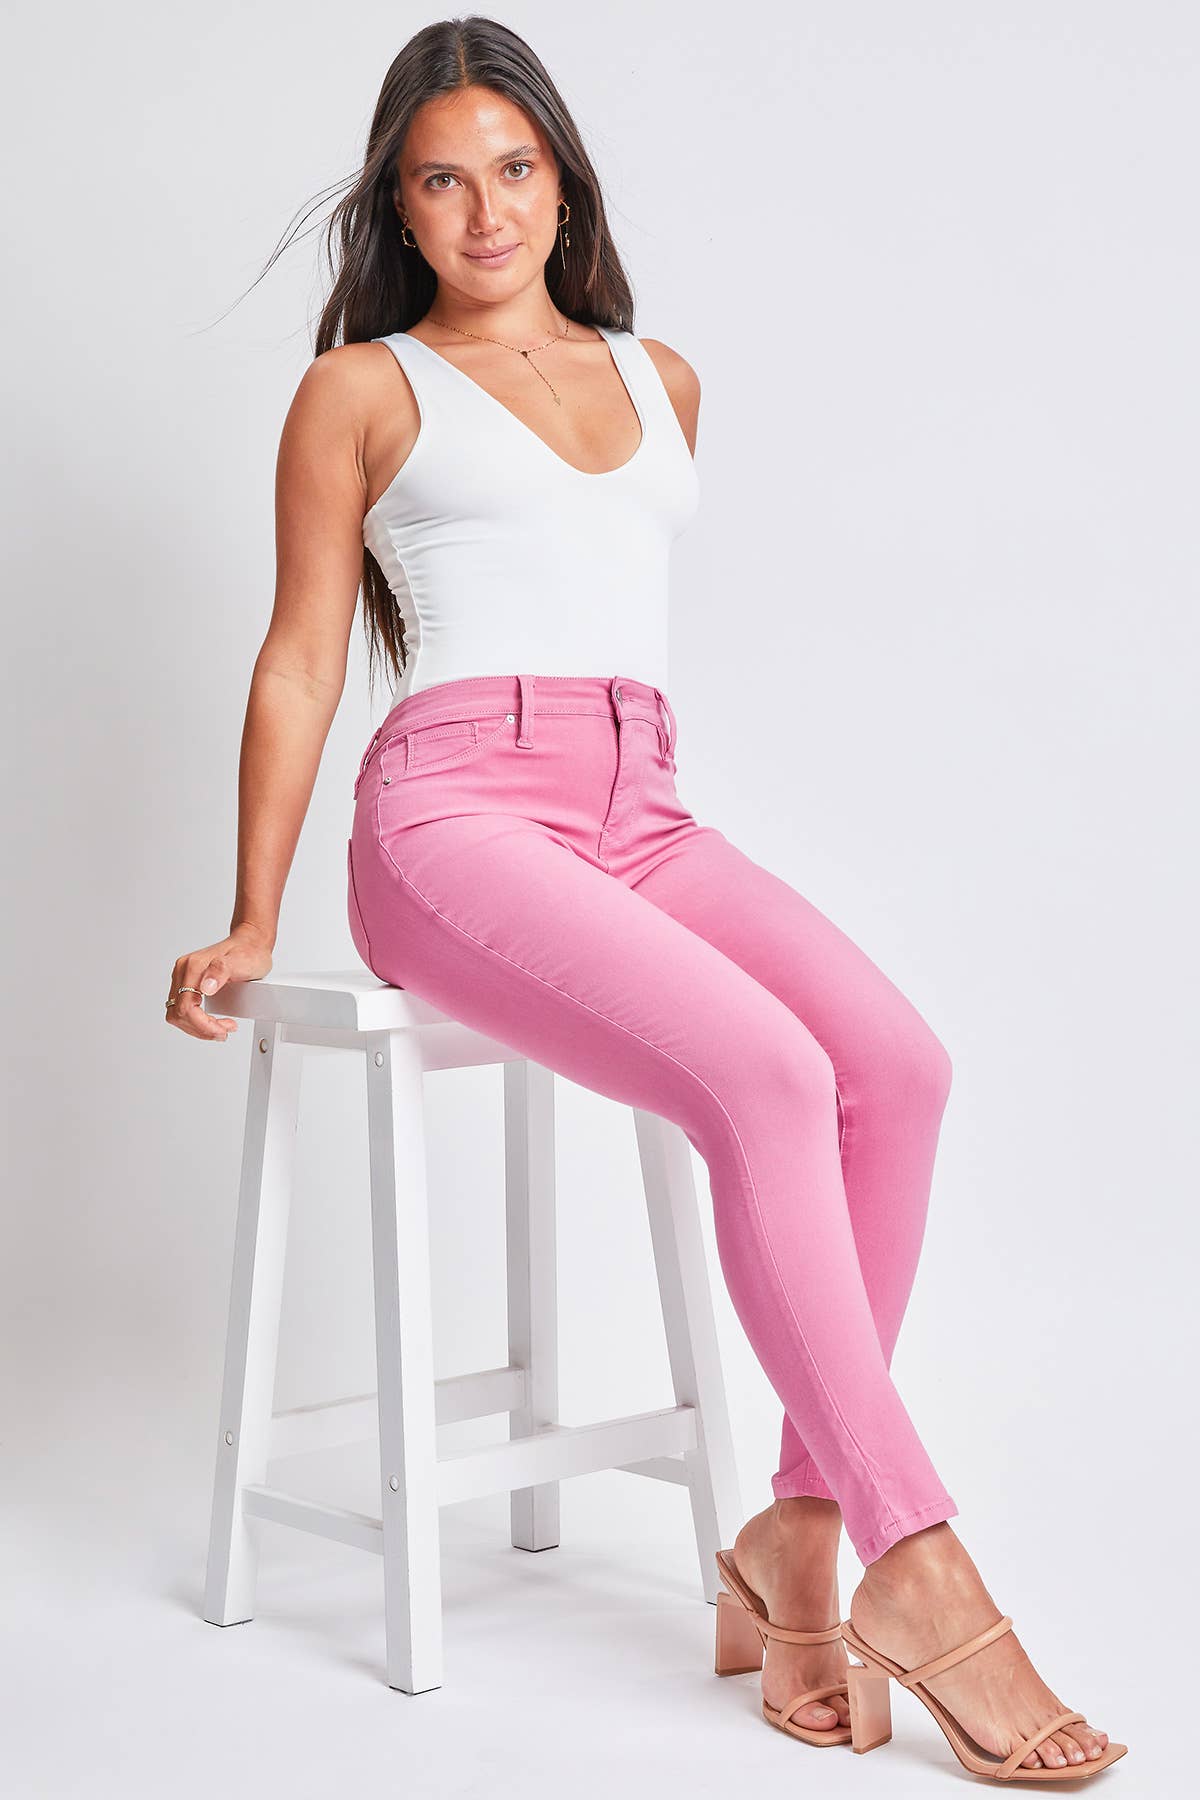 "Suzette" Hyperstretch Mid-Rise Skinny Jean